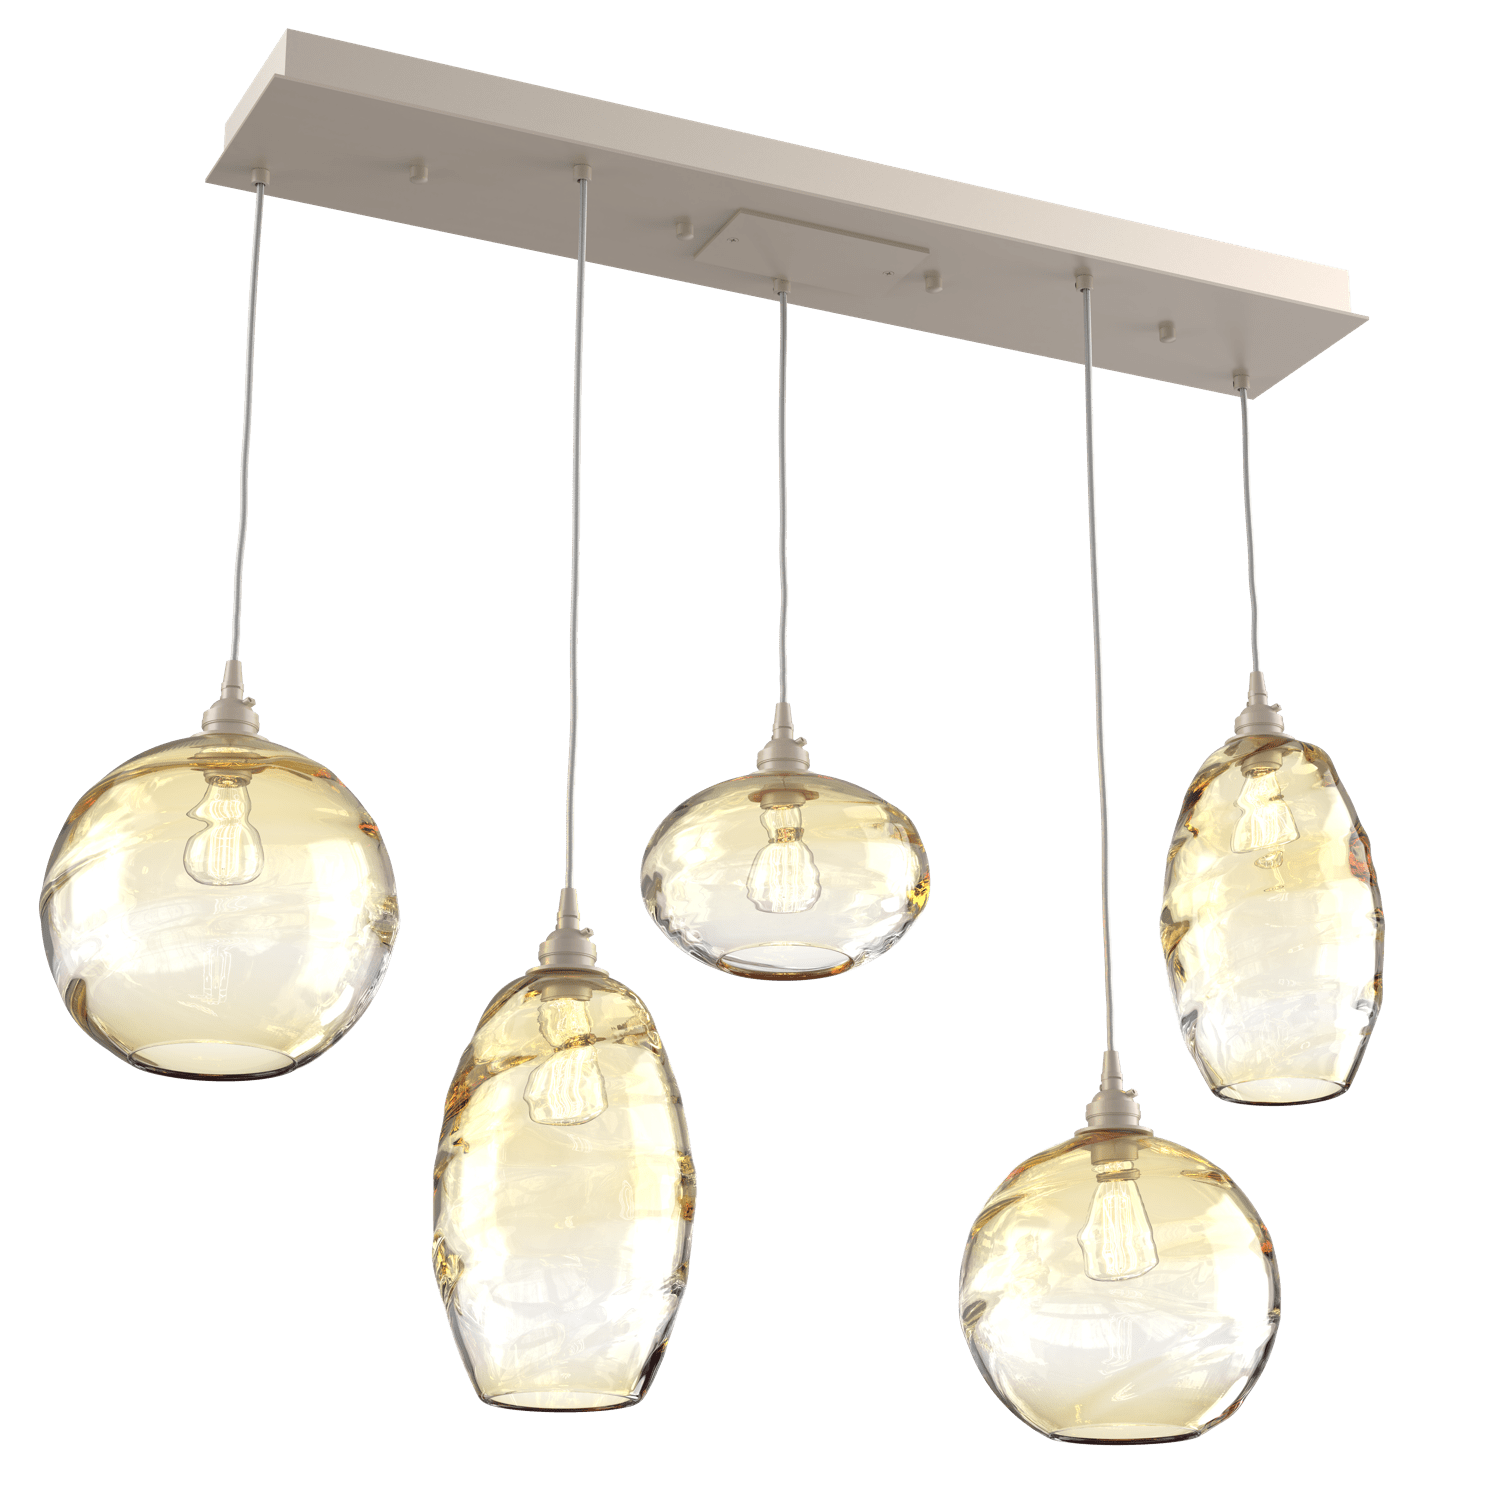 PLB0048-05-BS-OA-Hammerton-Studio-Optic-Blown-Glass-Misto-5-light-linear-pendant-chandelier-with-metallic-beige-silver-finish-and-optic-amber-blown-glass-shades-and-incandescent-lamping